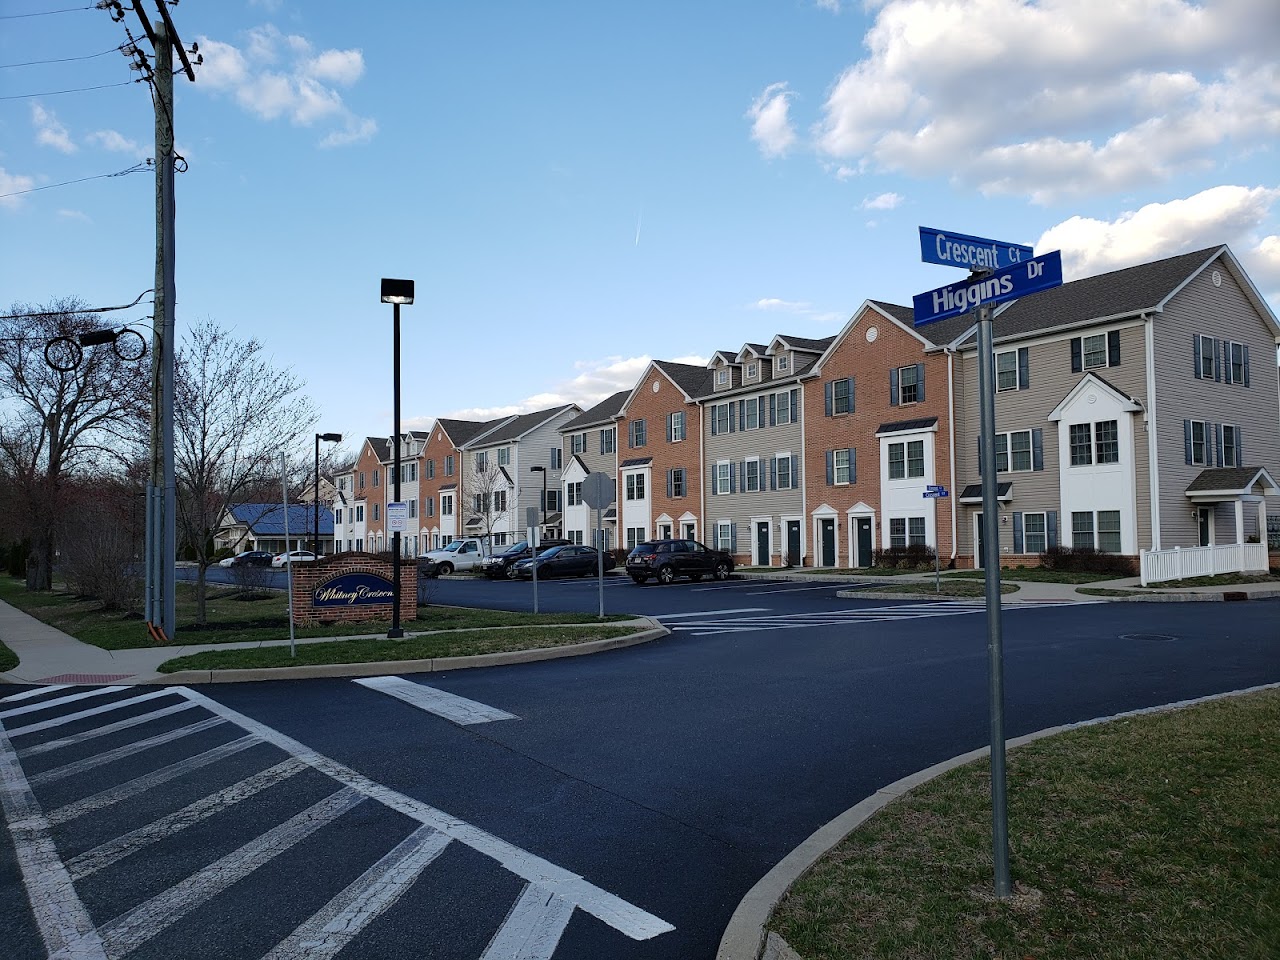 Photo of WHITNEY CRESCENT. Affordable housing located at 3000 CRESCENT COURT GLASSBORO, NJ 08028